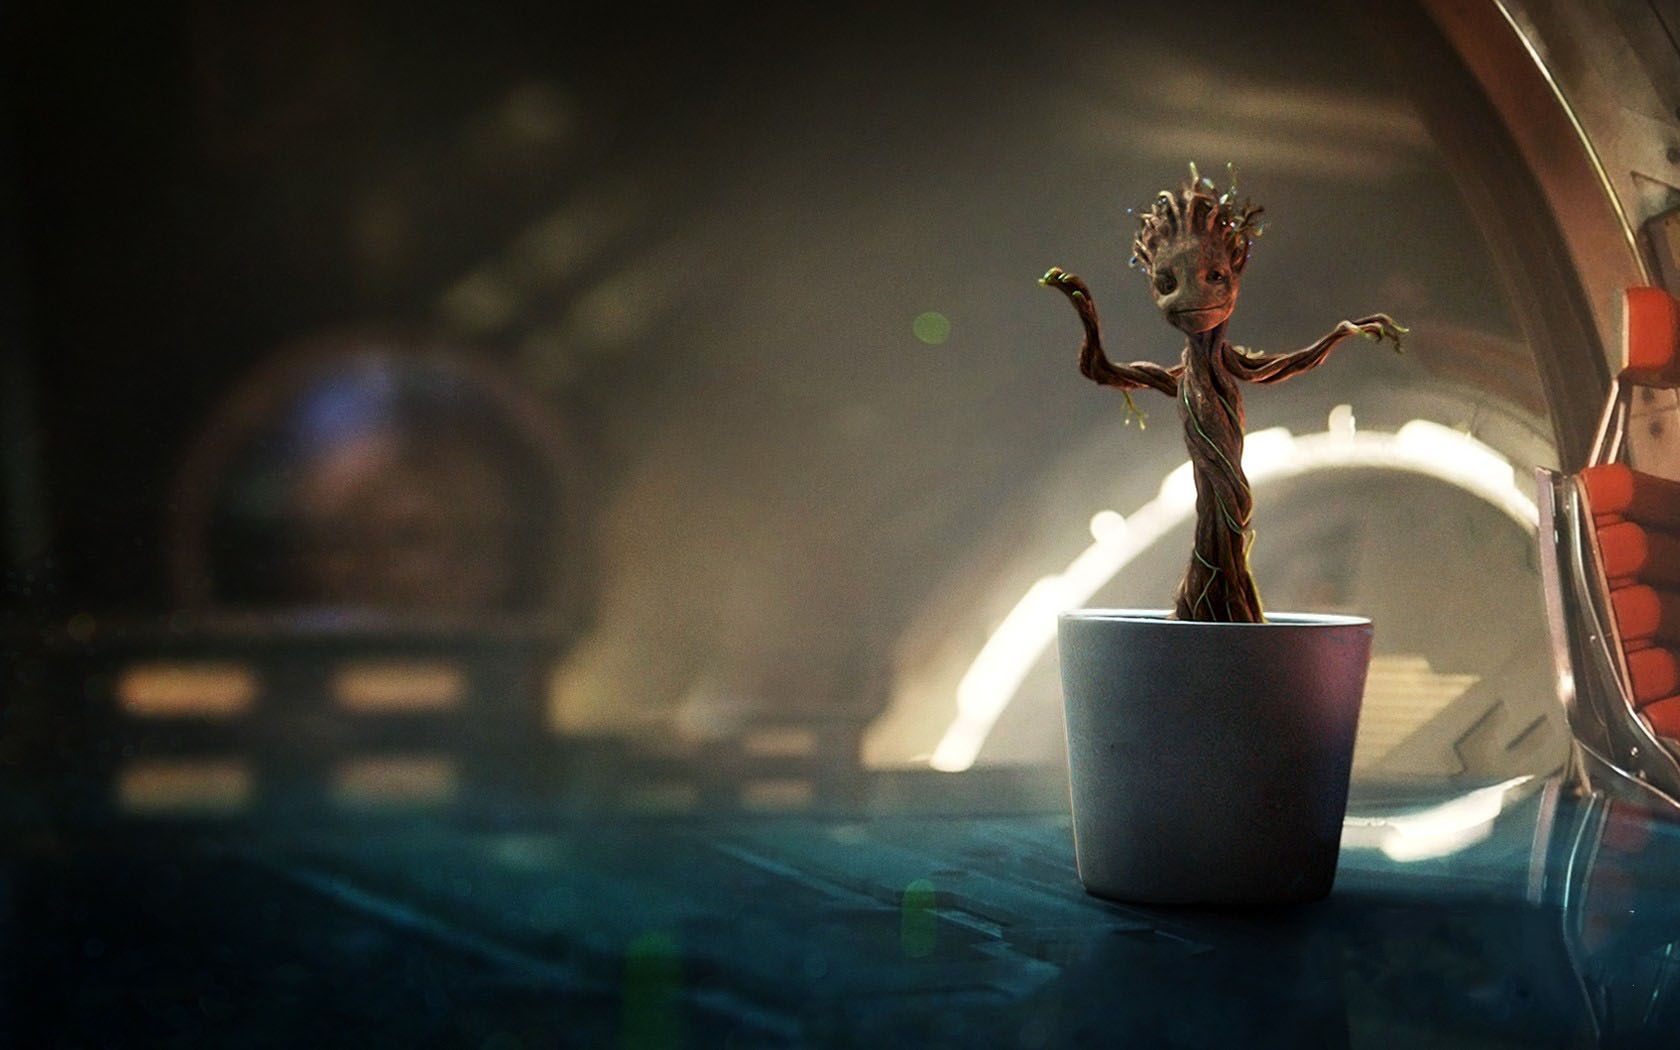 Guardians Of The Galaxy Fans: This Dancing Groot Toy Is Half Price Today